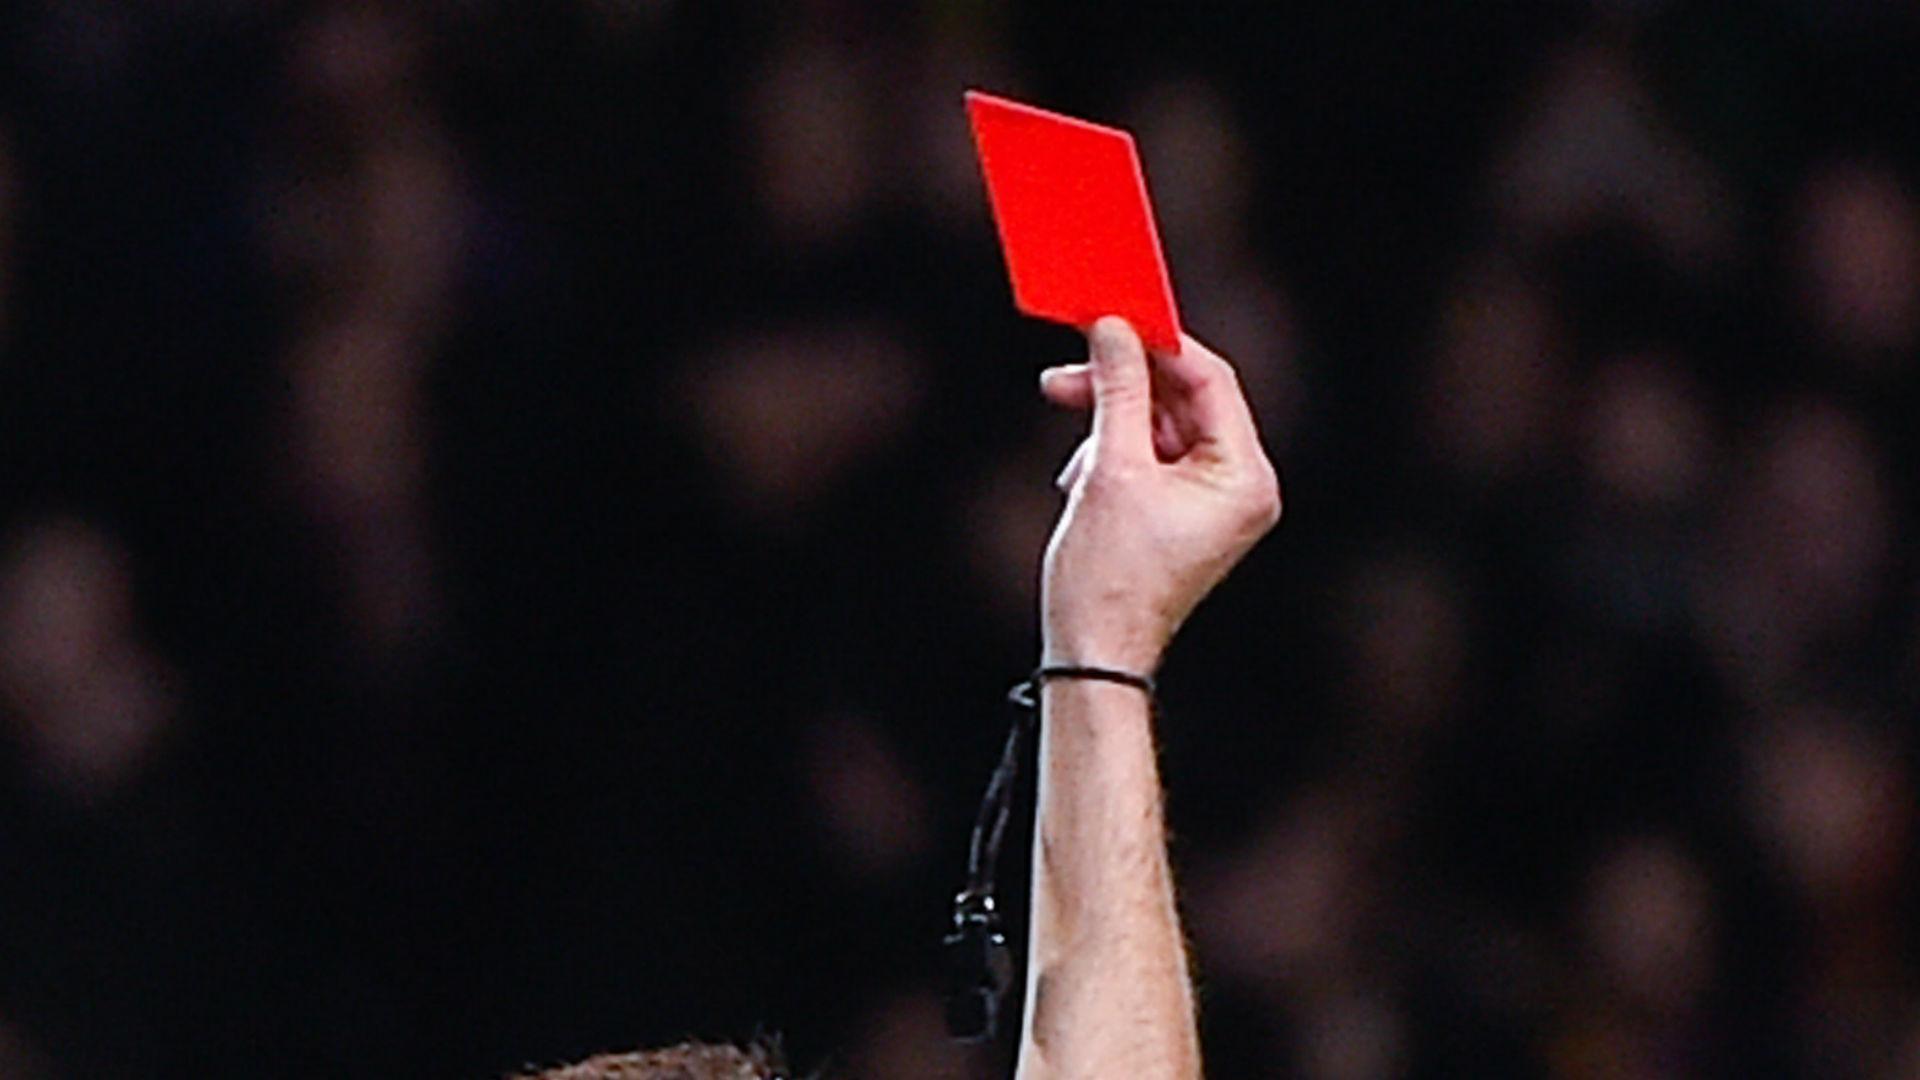 Who Has The Most Red Cards In Premier League History?